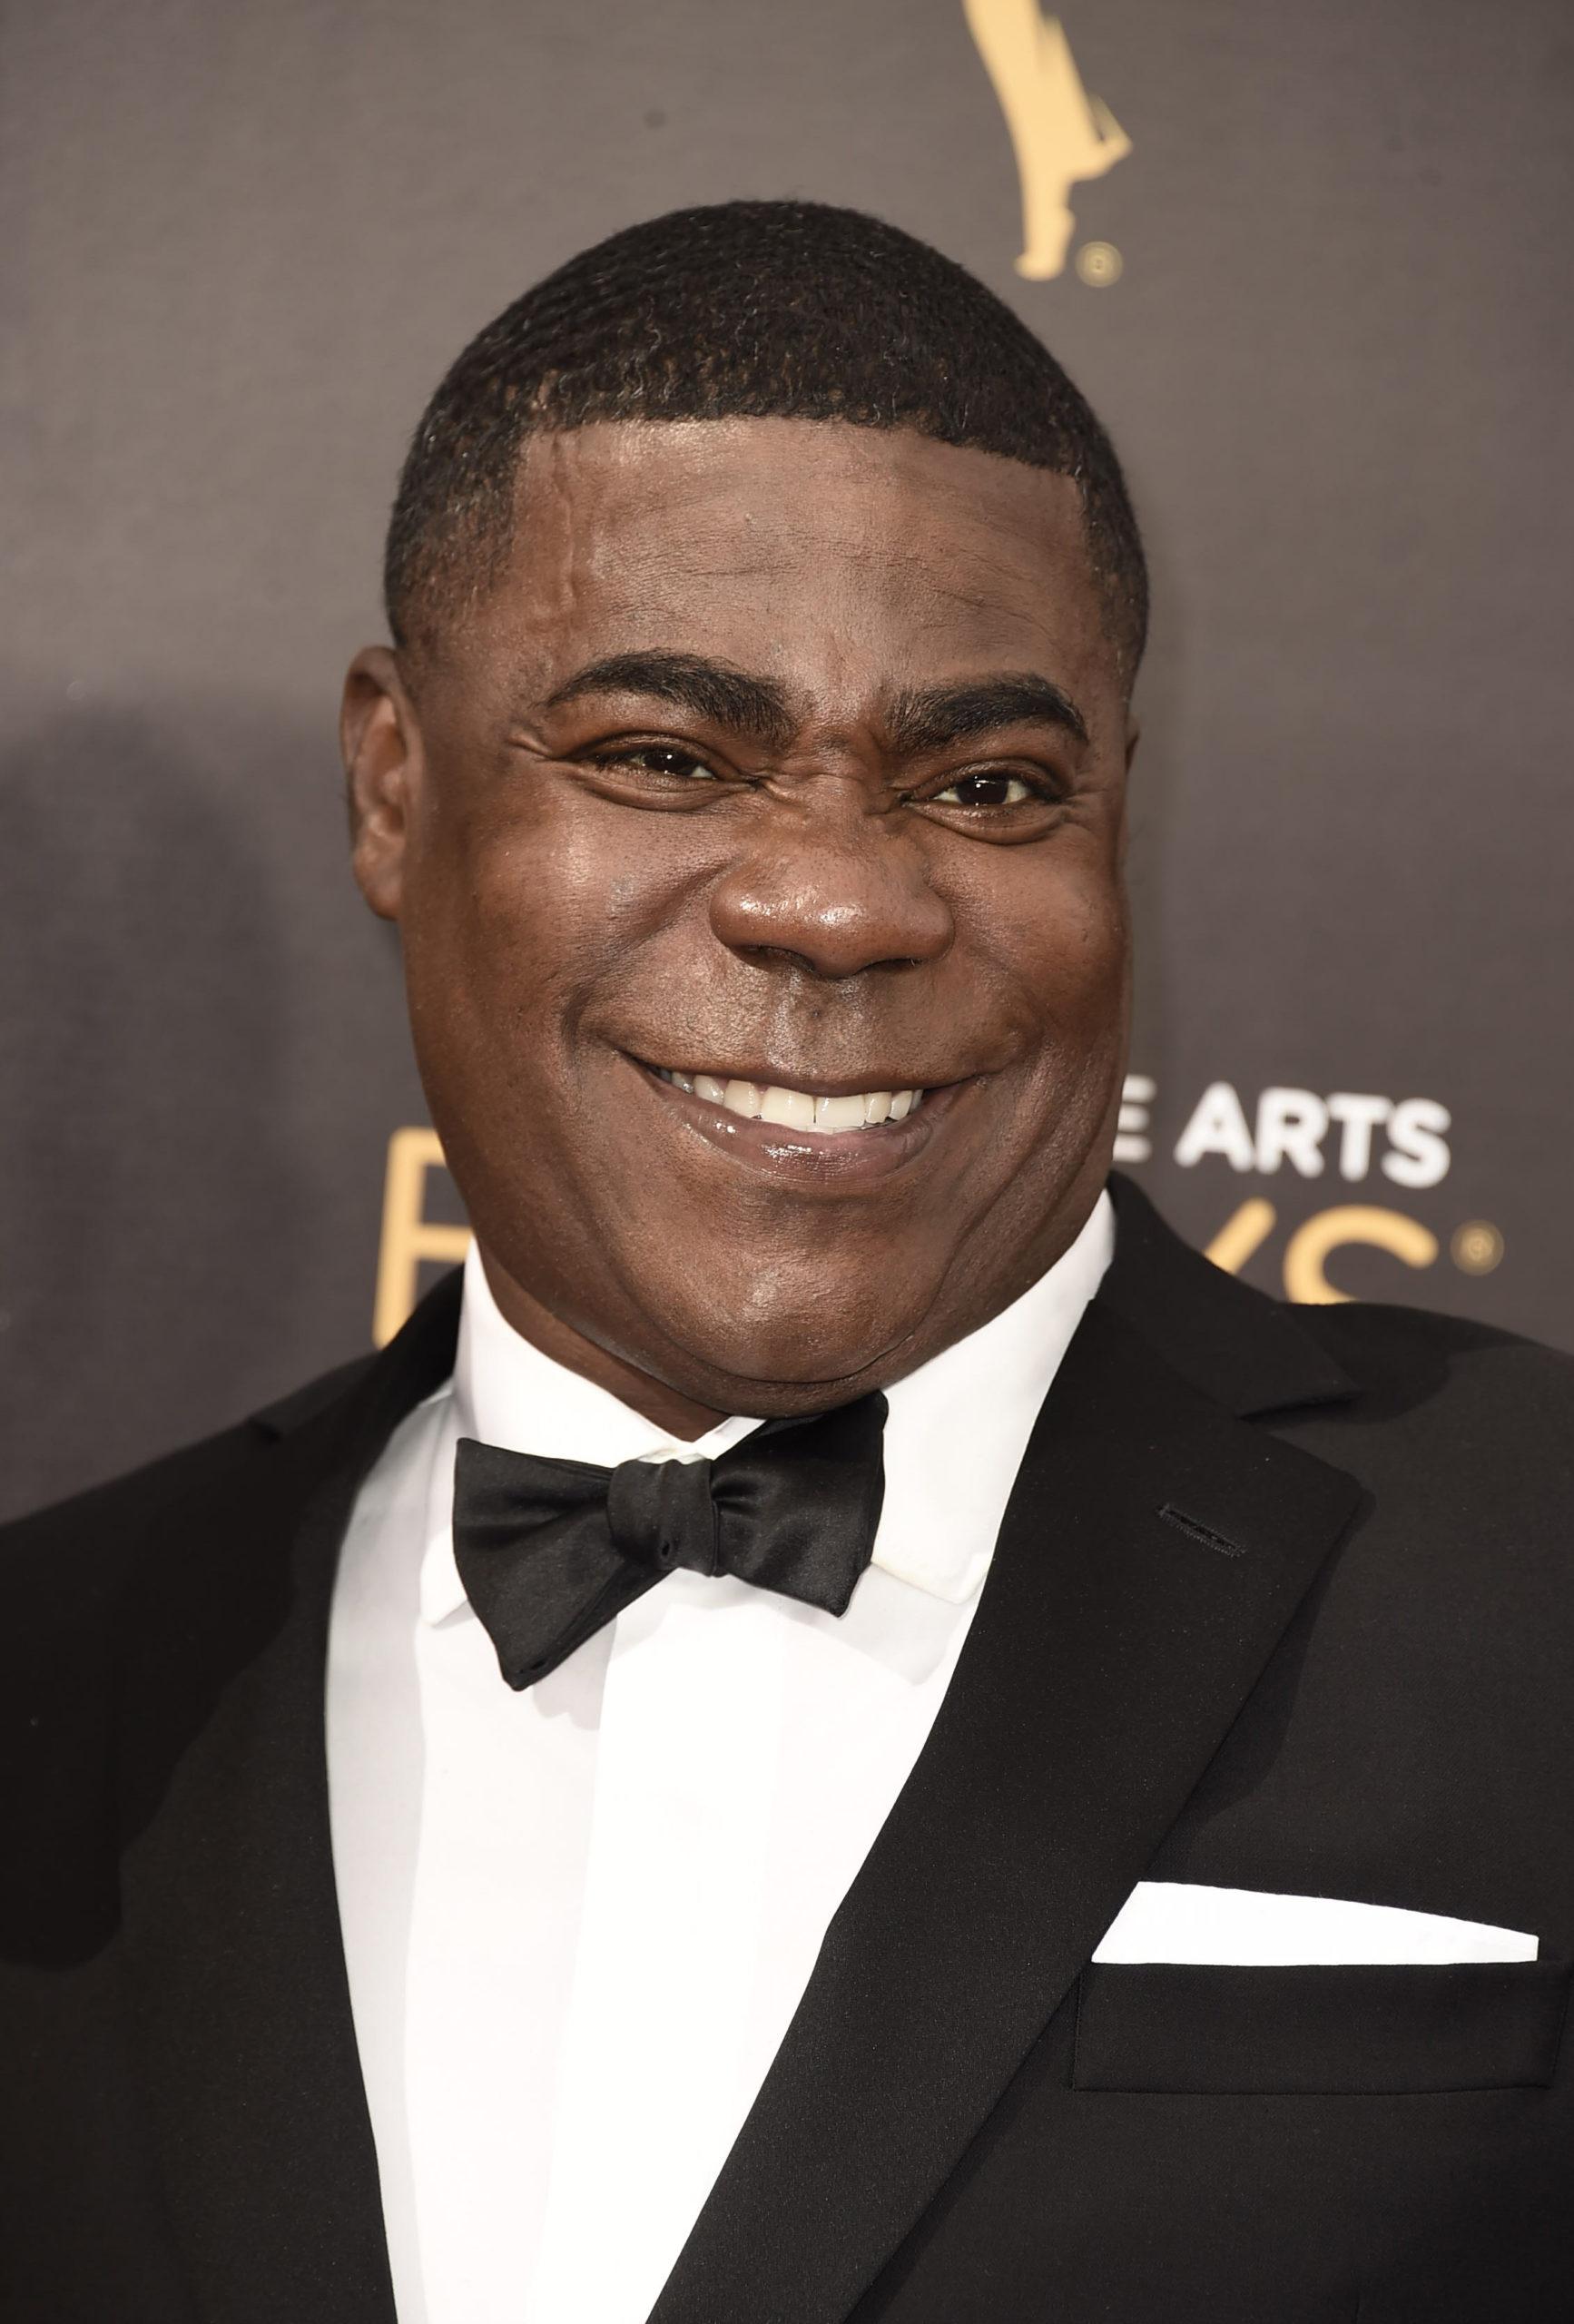 Tracy Morgan plays the high school's football coach in "Fist Fight." (Photo by Dan Steinberg/Invision for the Television Academy/AP Images)